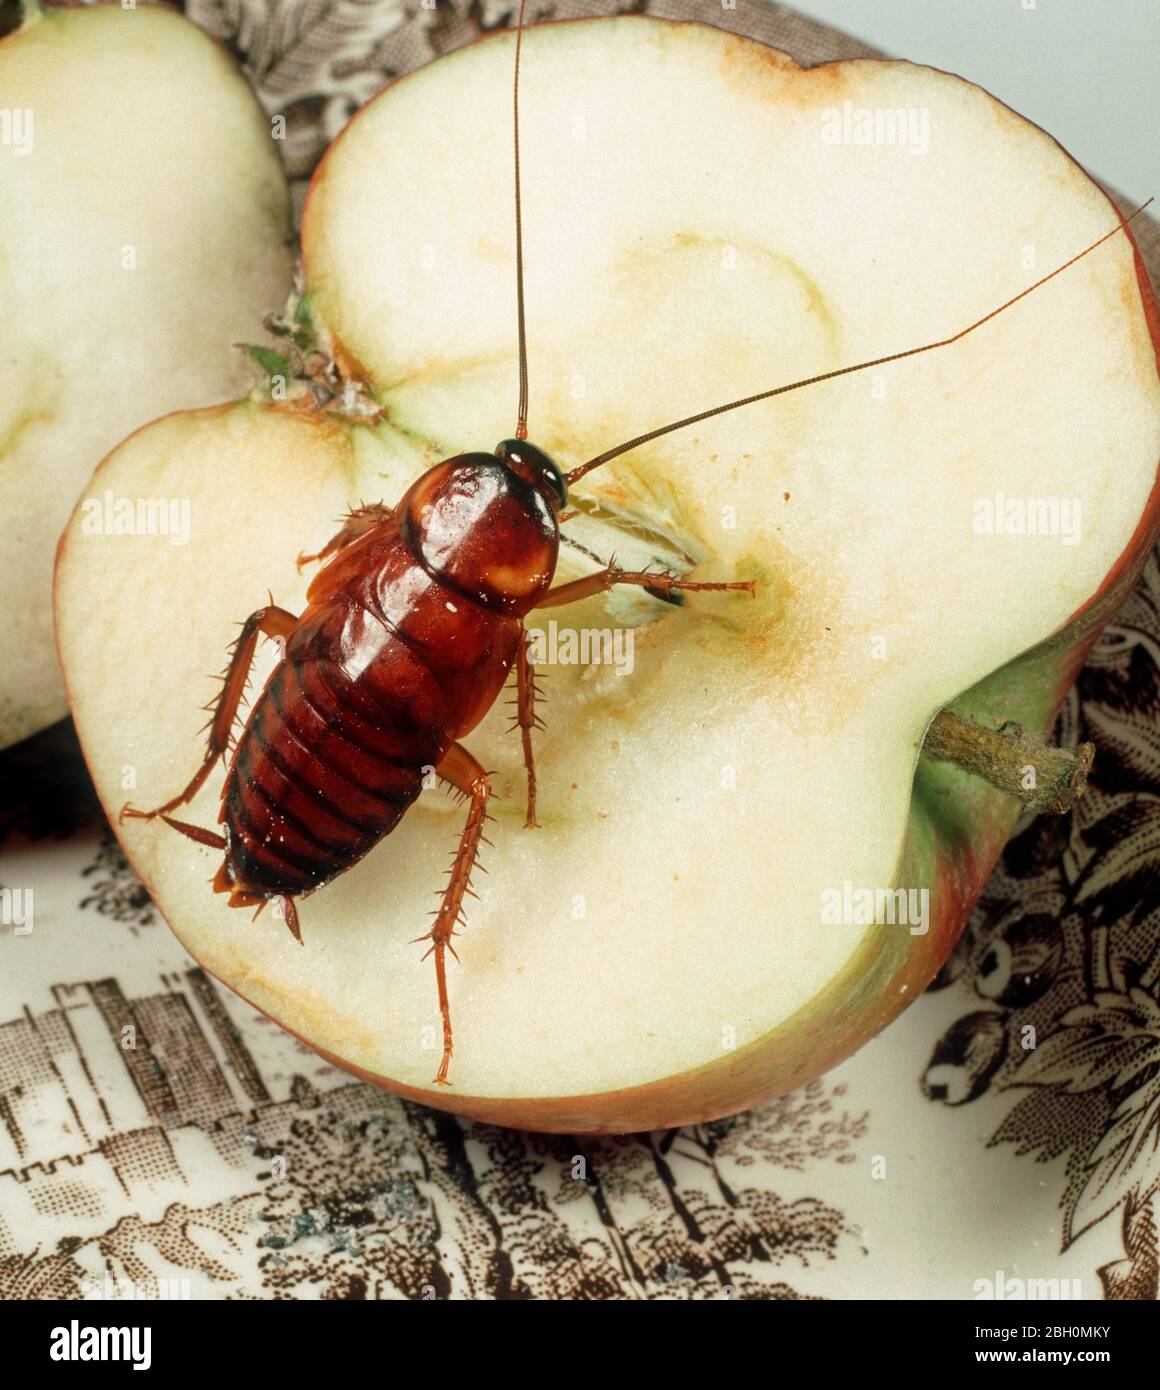 American Cockroach (Periplanata americana) nymph of household pest on an apple Stock Photo